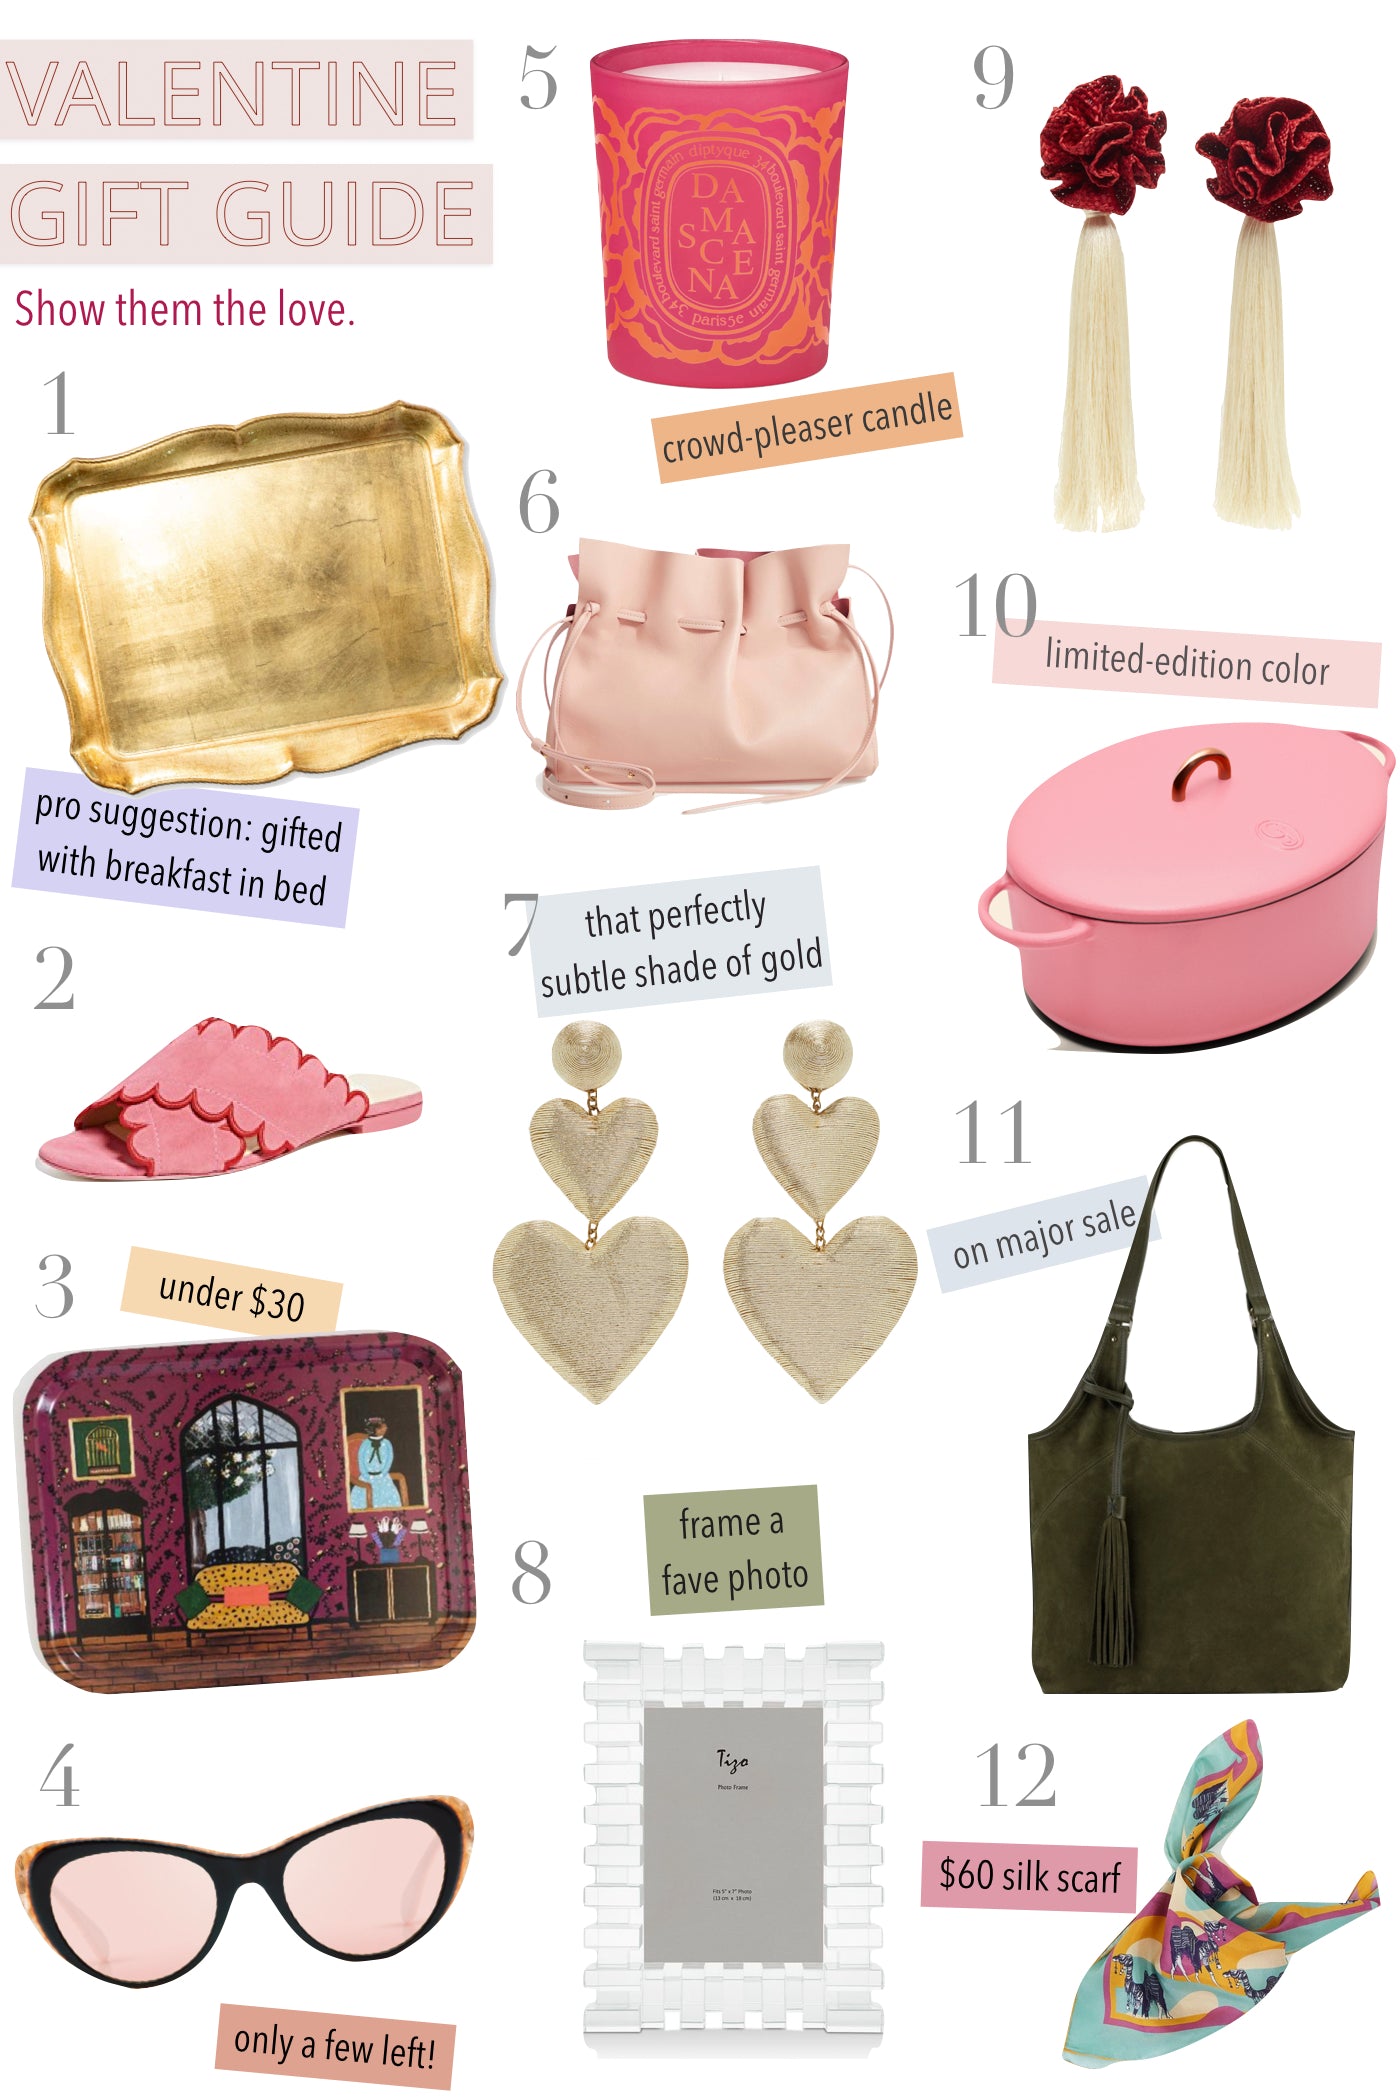 Valentine's Day Is 10 Days Away: Forward This Gift Guide to your Lover